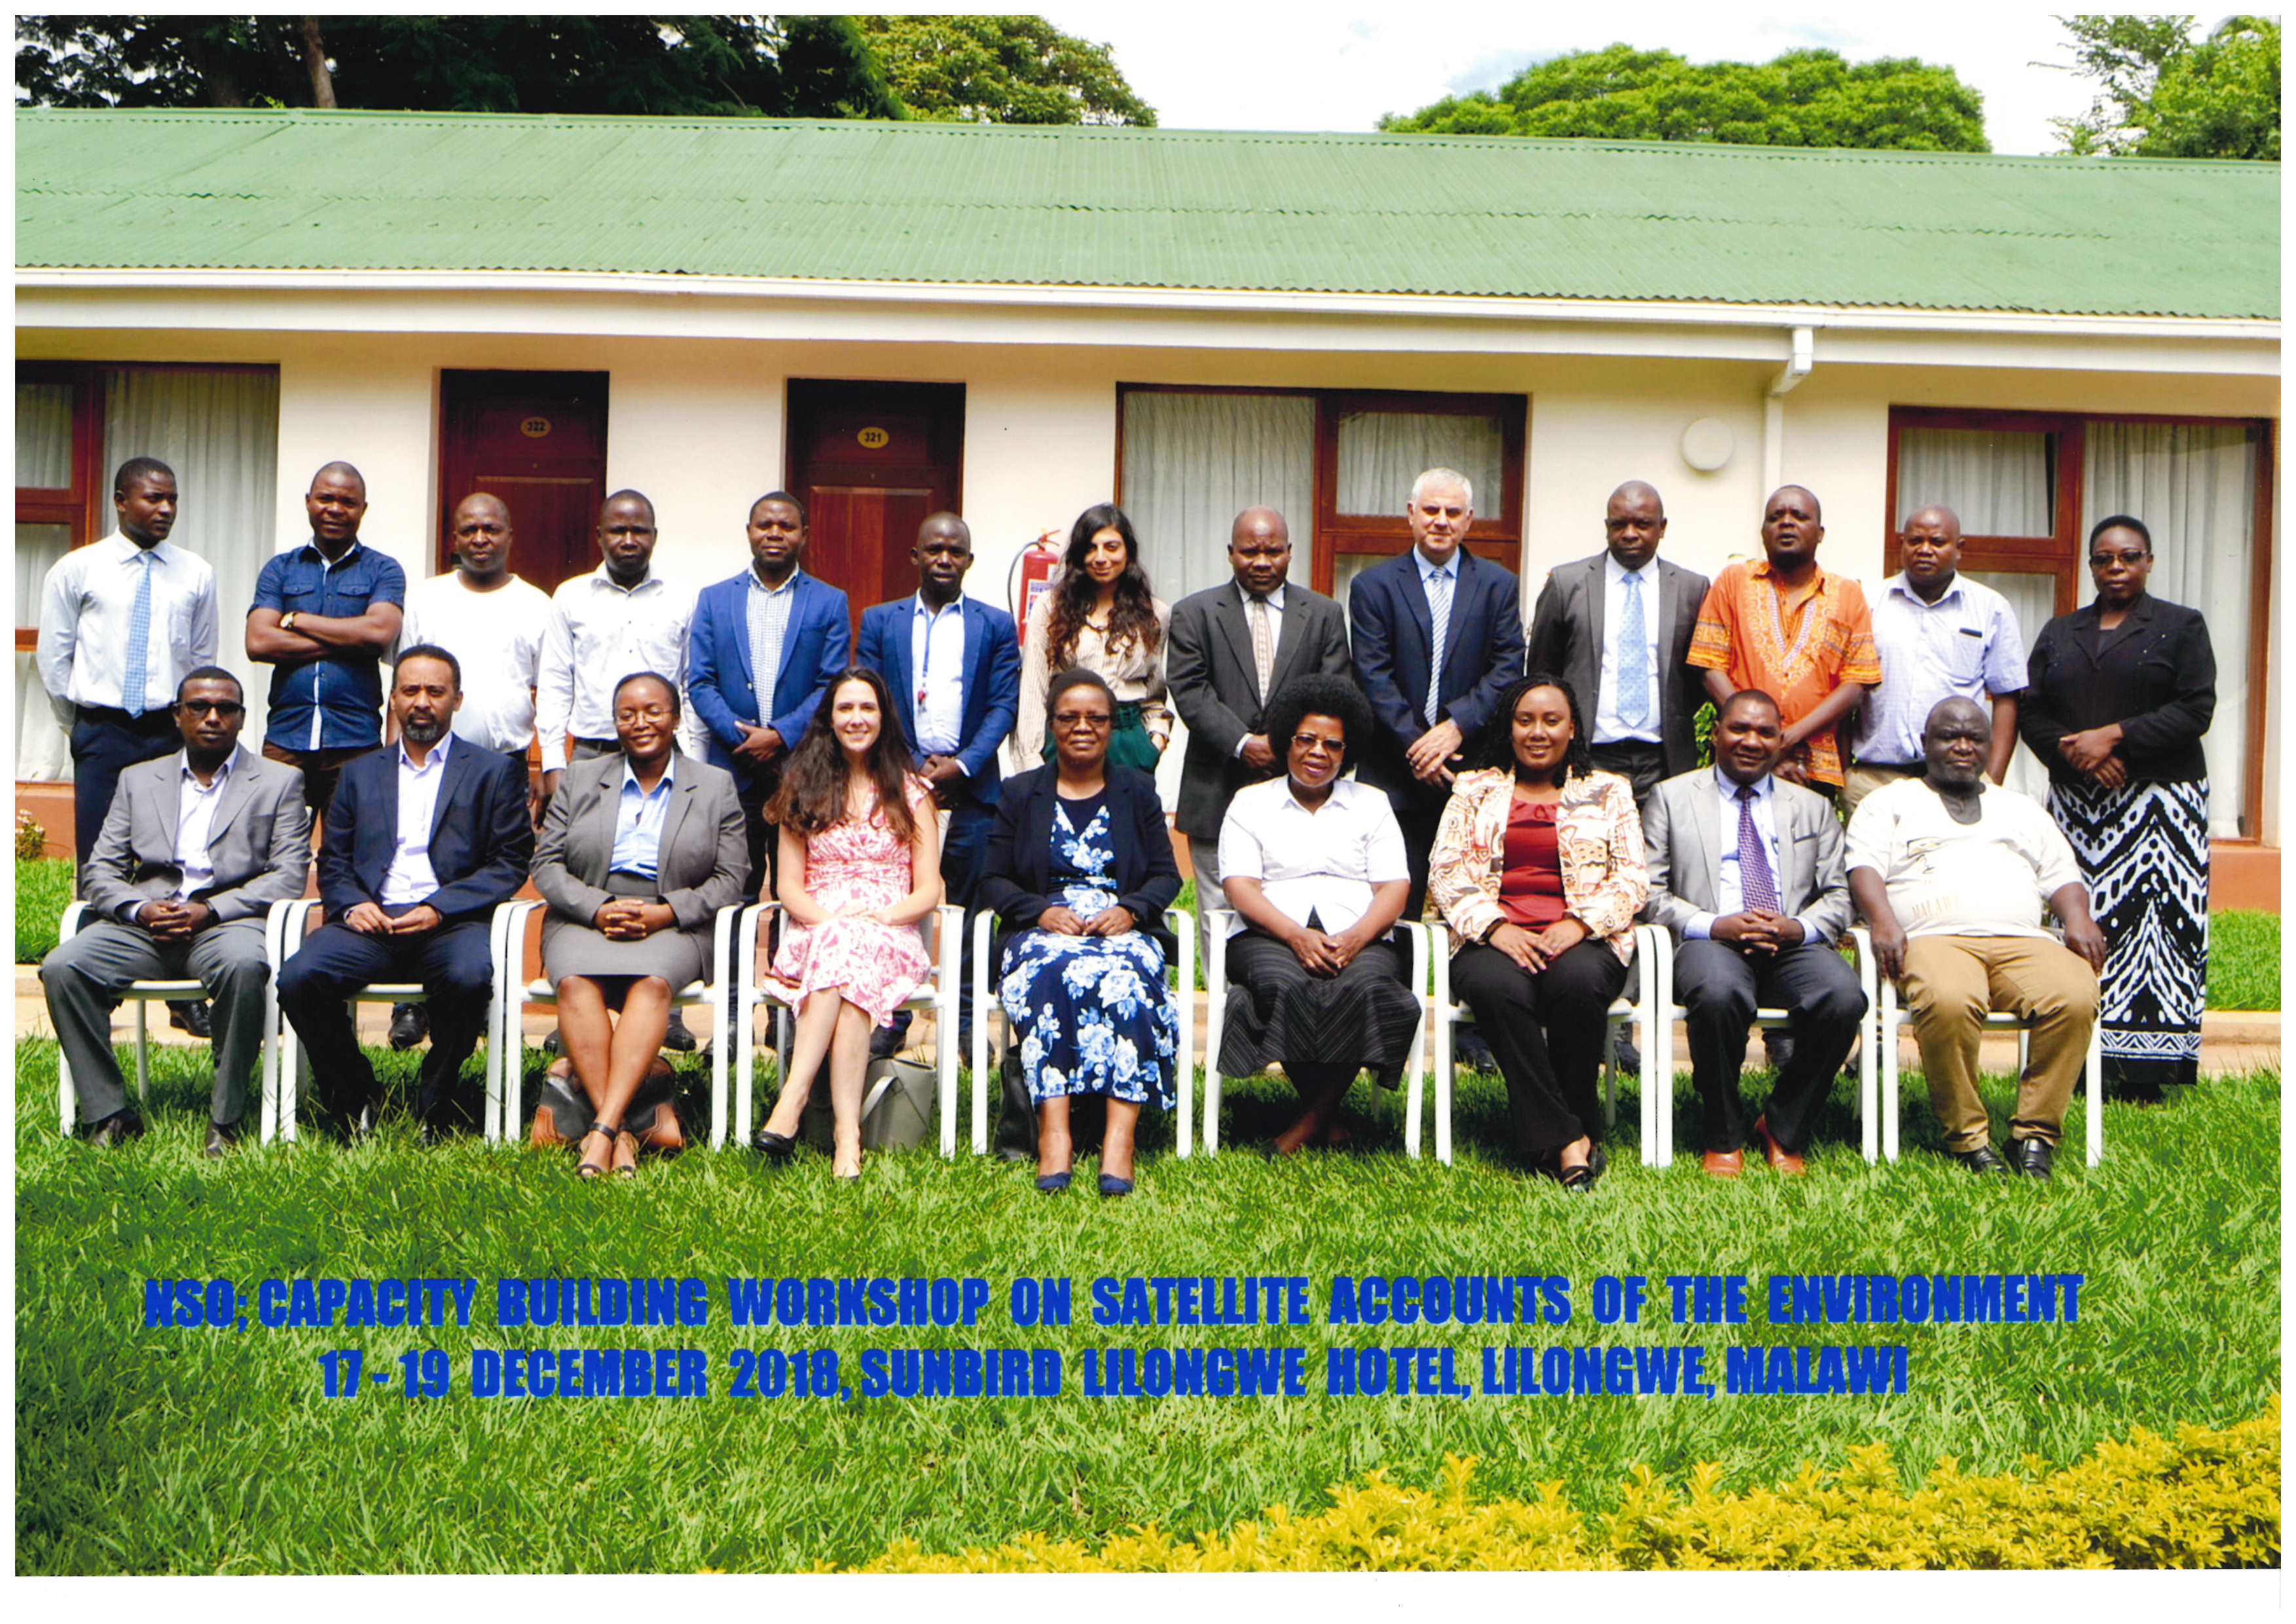 Capacity Building Workshop on Satellite Accounts of the Environment in Malawi